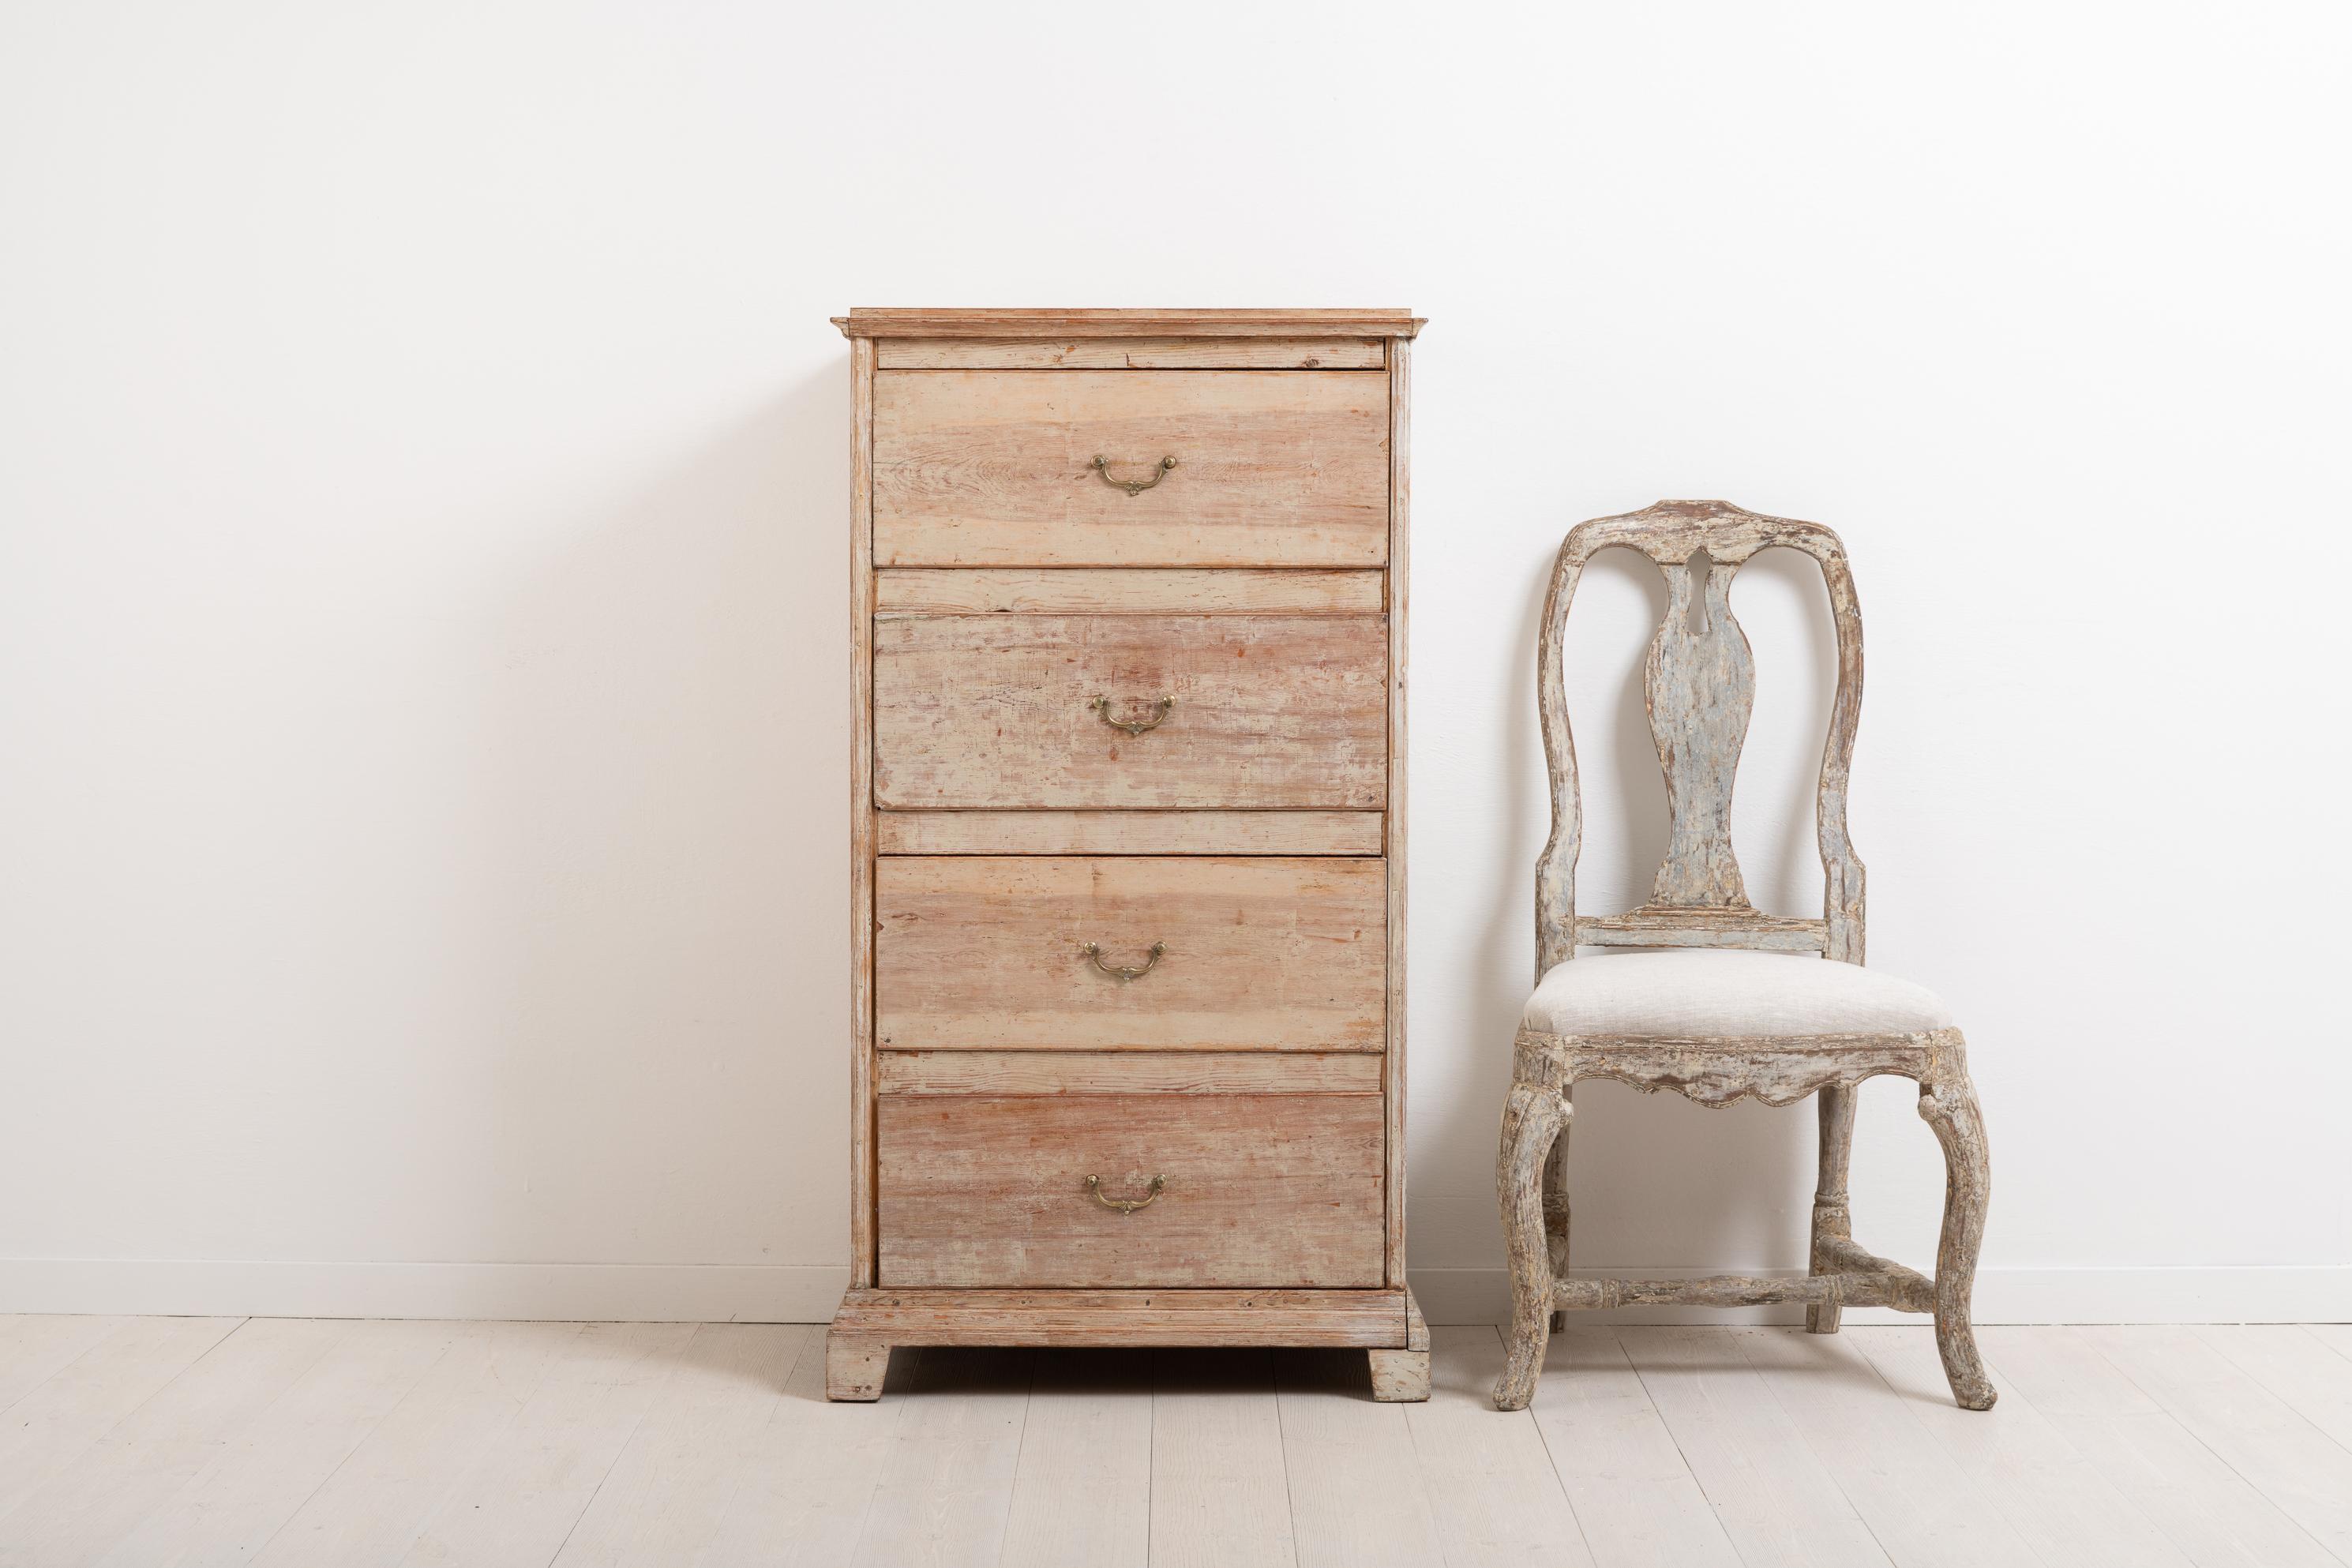 Swedish chest of drawers from the northern part of the country. The chest is made in the neoclassic style with the characteristic straight shape. Simple and minimalistic decor. It is unusually tall and narrow. Made circa 1830 in pine. The chest has